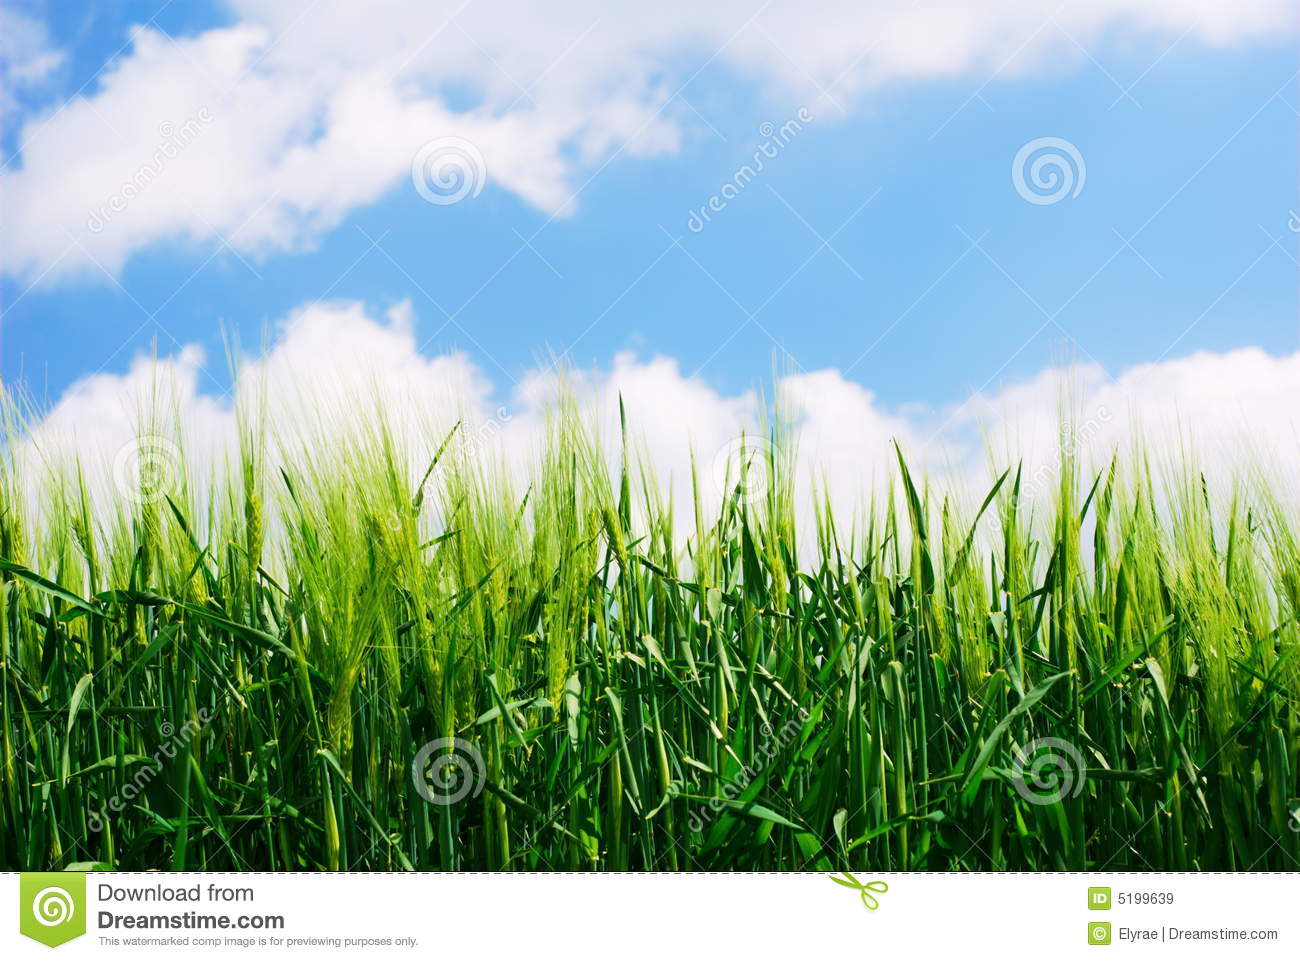 Green Wheat Plant Details Royalty Free Stock Images   Image  5199639